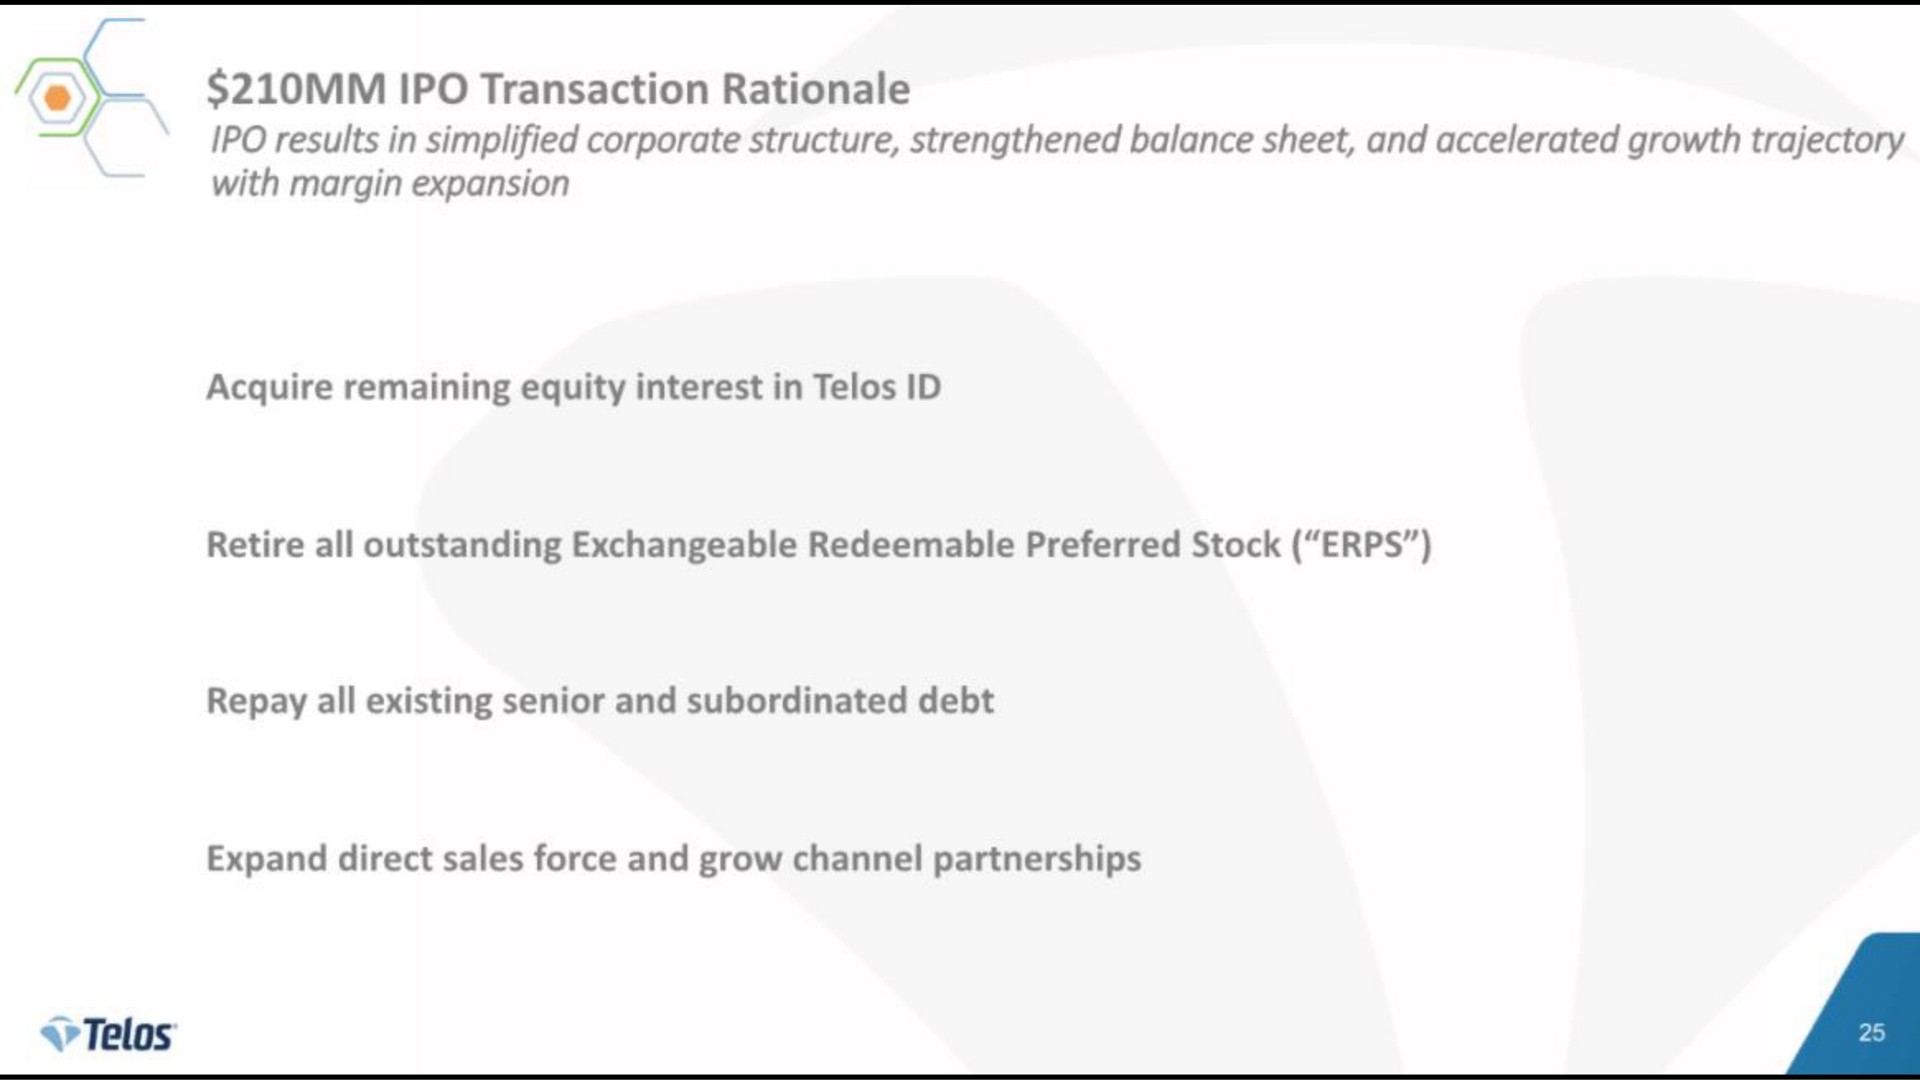 a transaction rationale results in simplified corporate structure strengthened balance sheet and accelerated growth trajectory | Telos